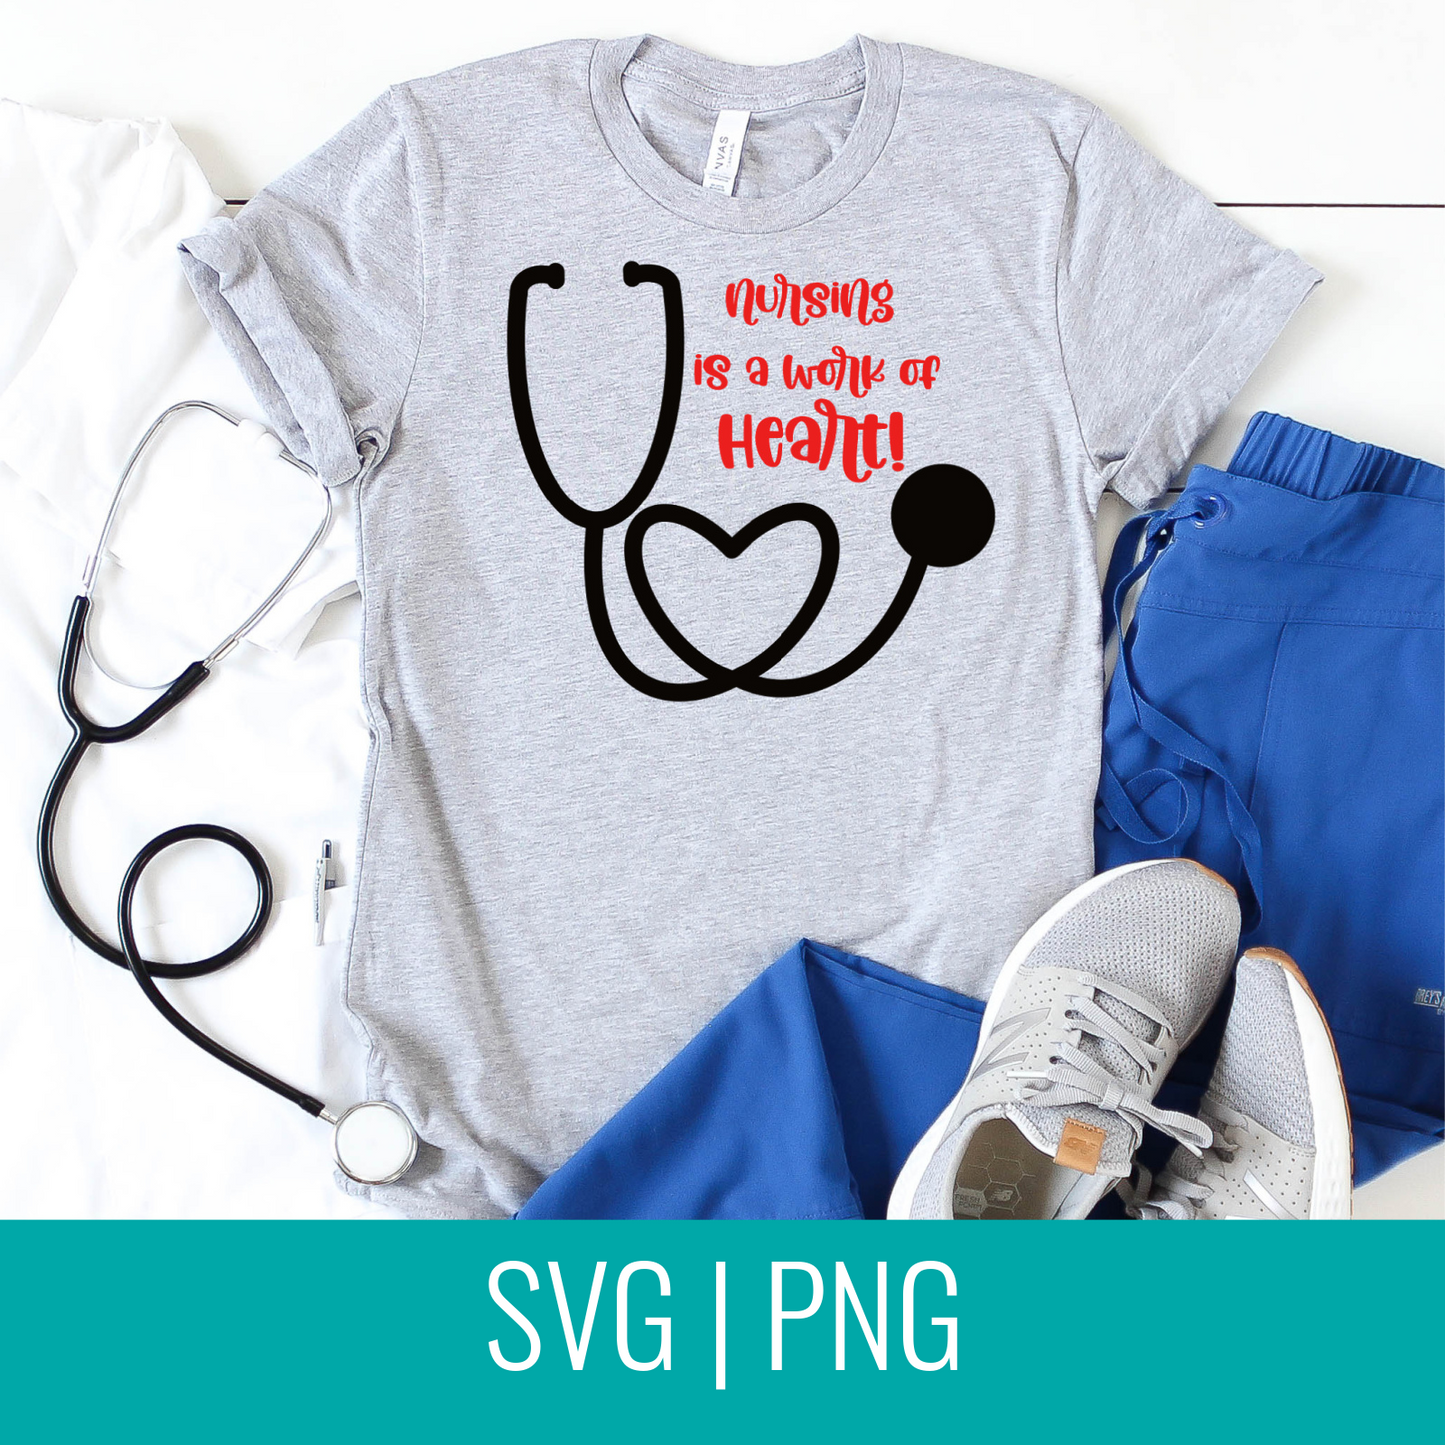 Nursing Is A Work Of Heart SVG Cut File and PNG